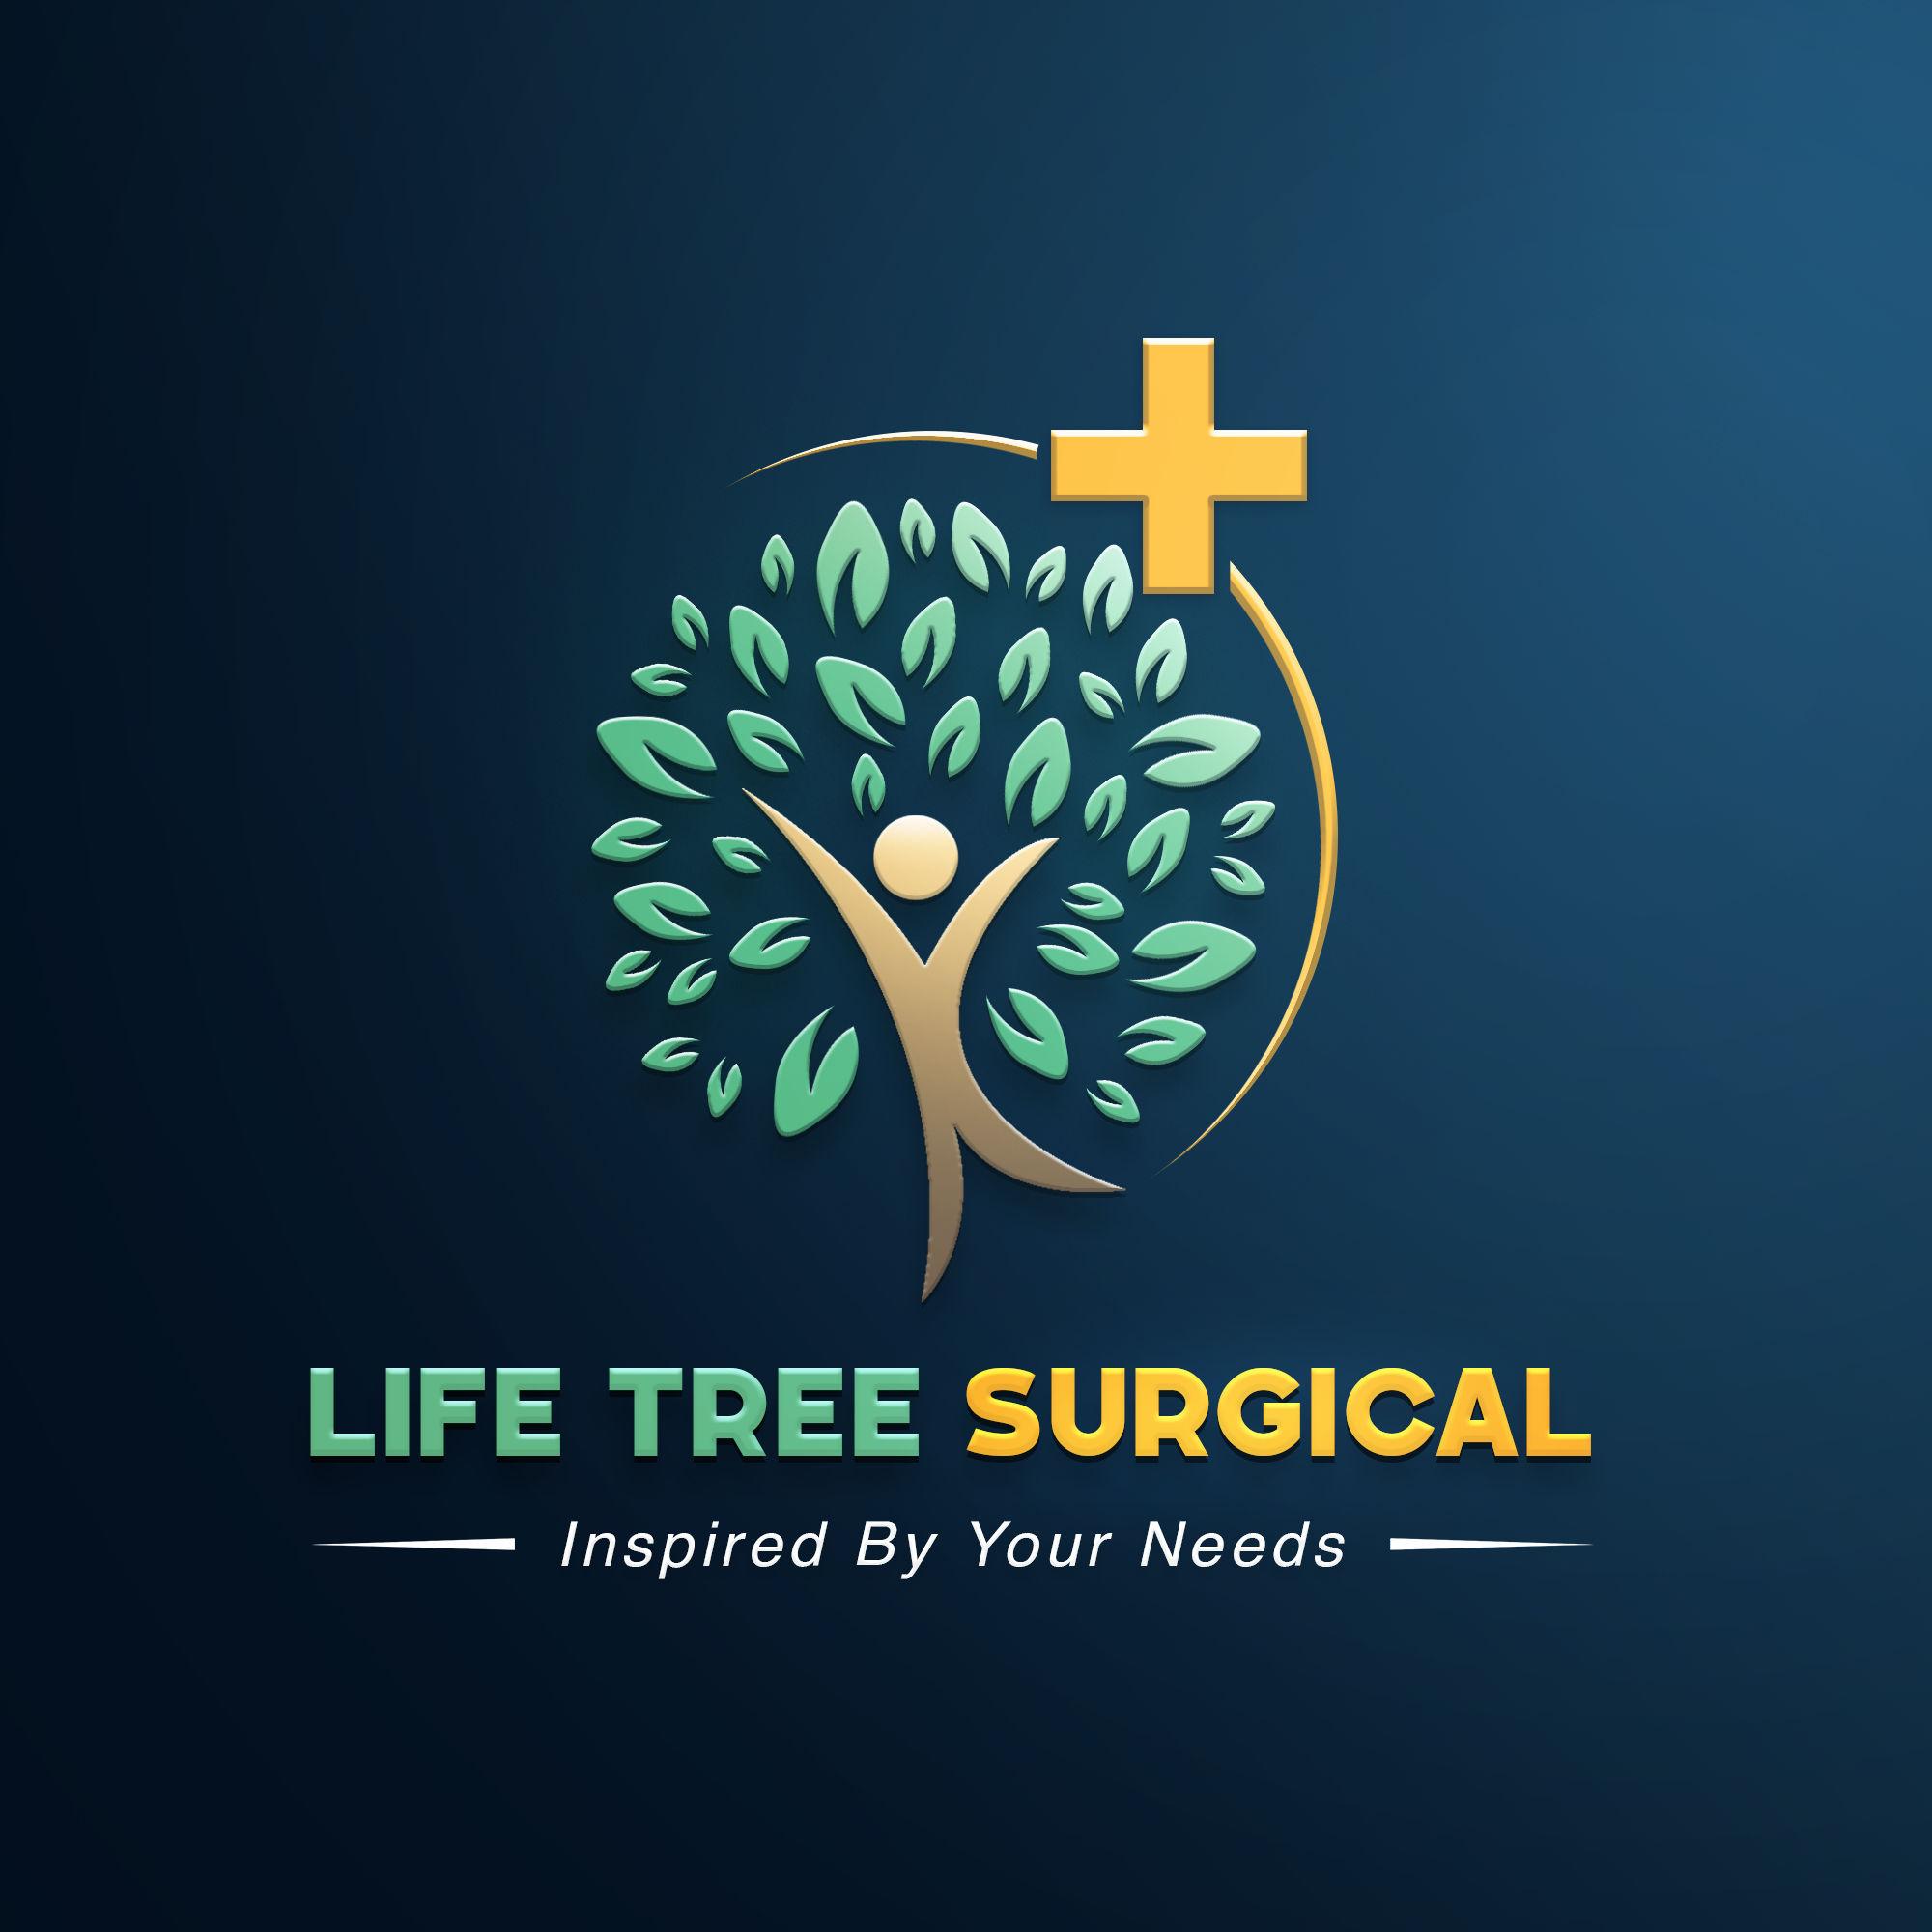 LIFE TREE SURGICAL